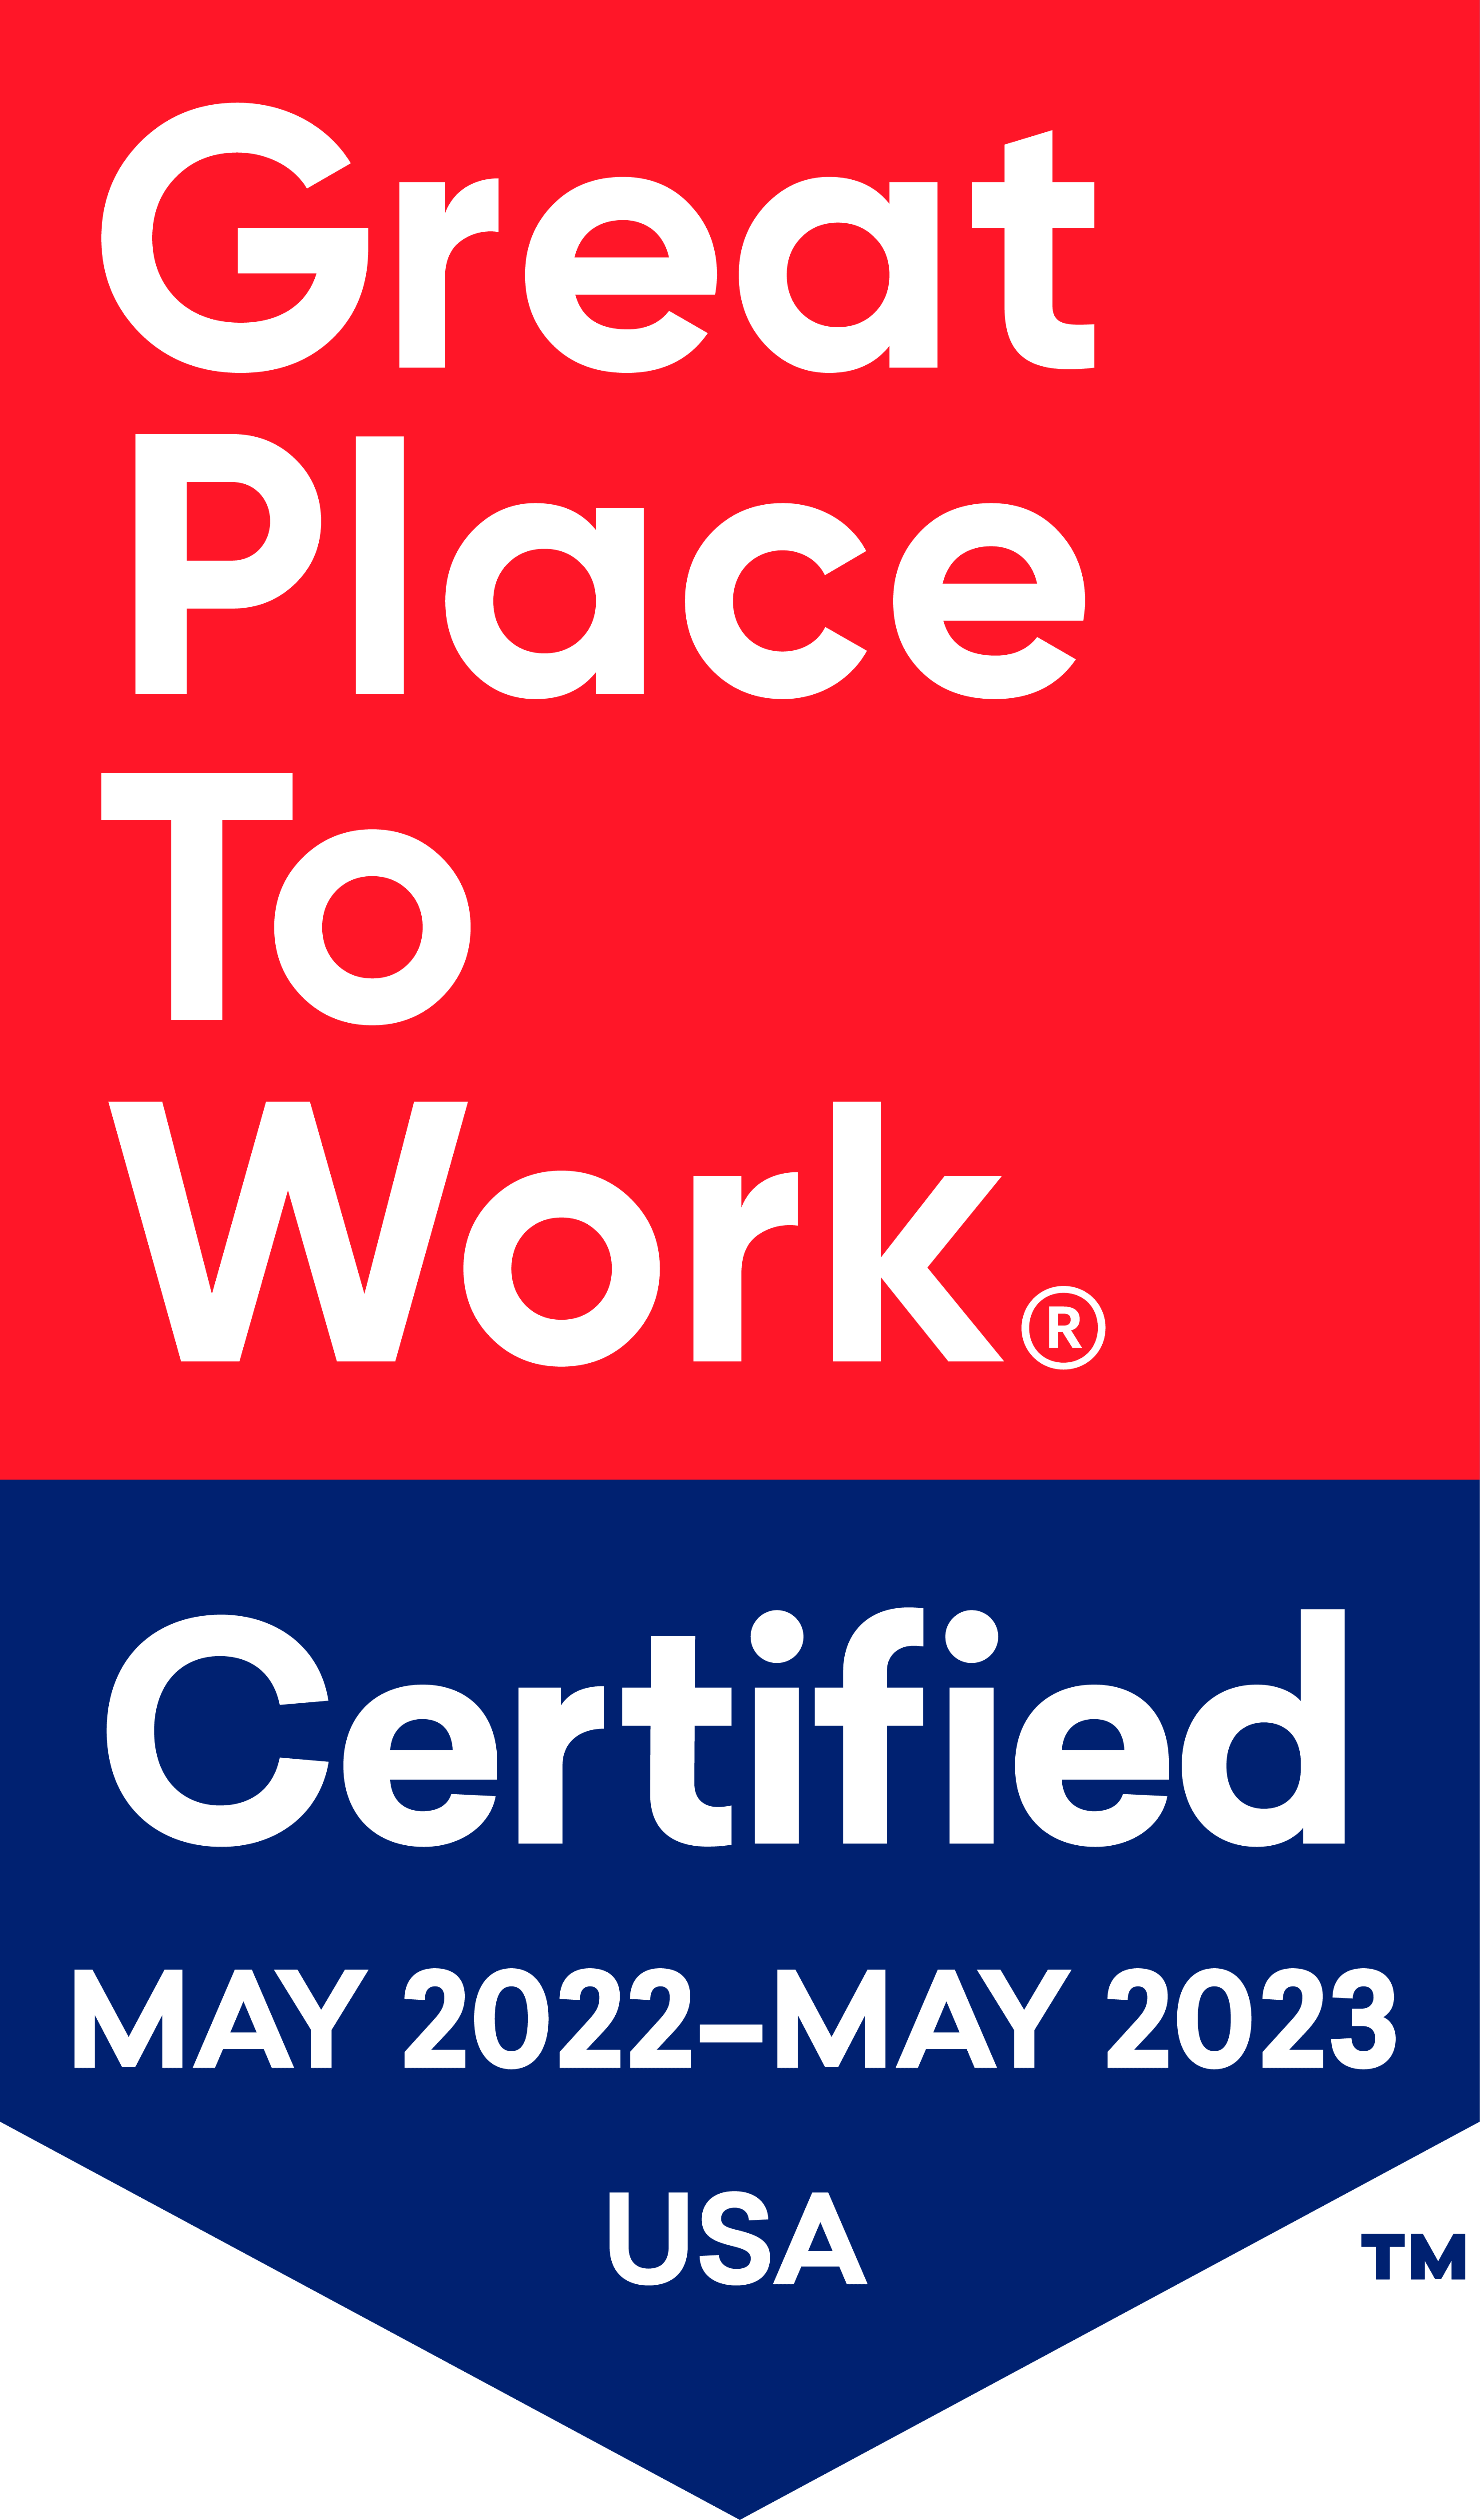 The Montera is Great Place To Work Certified